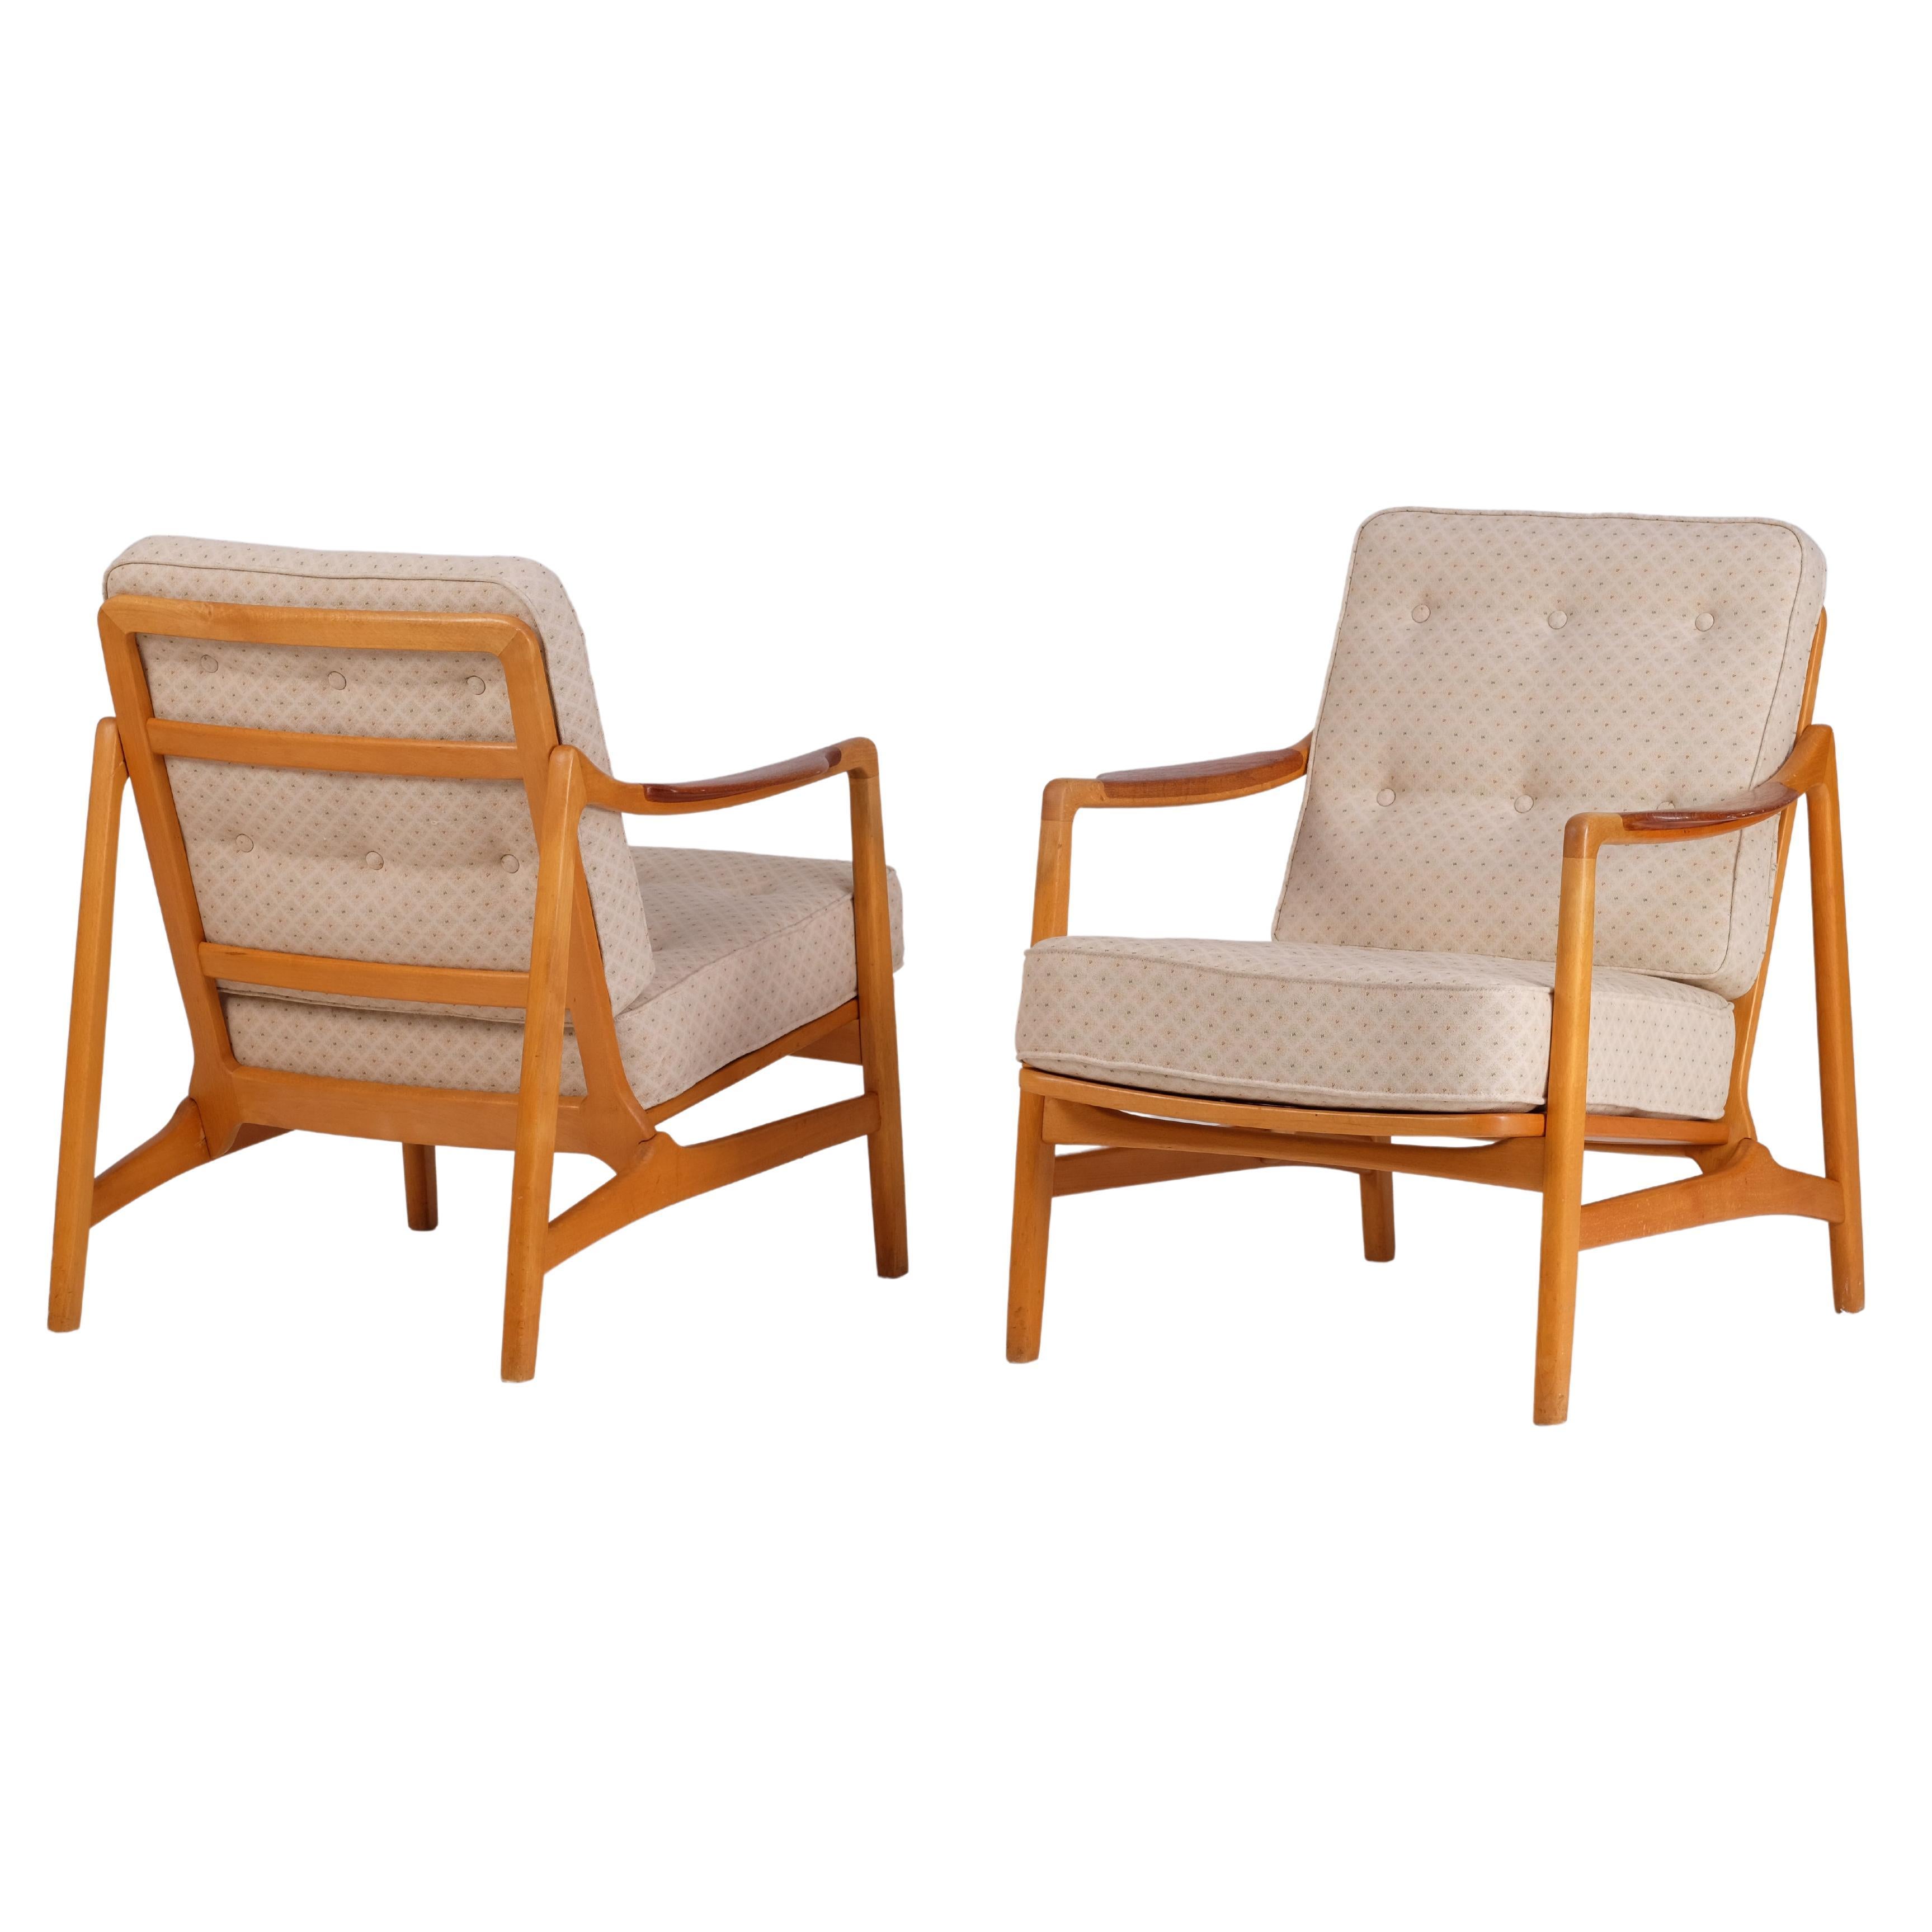 Pair of Tove and Edvard Kindt-Larsen Lounge Chairs, 1960s